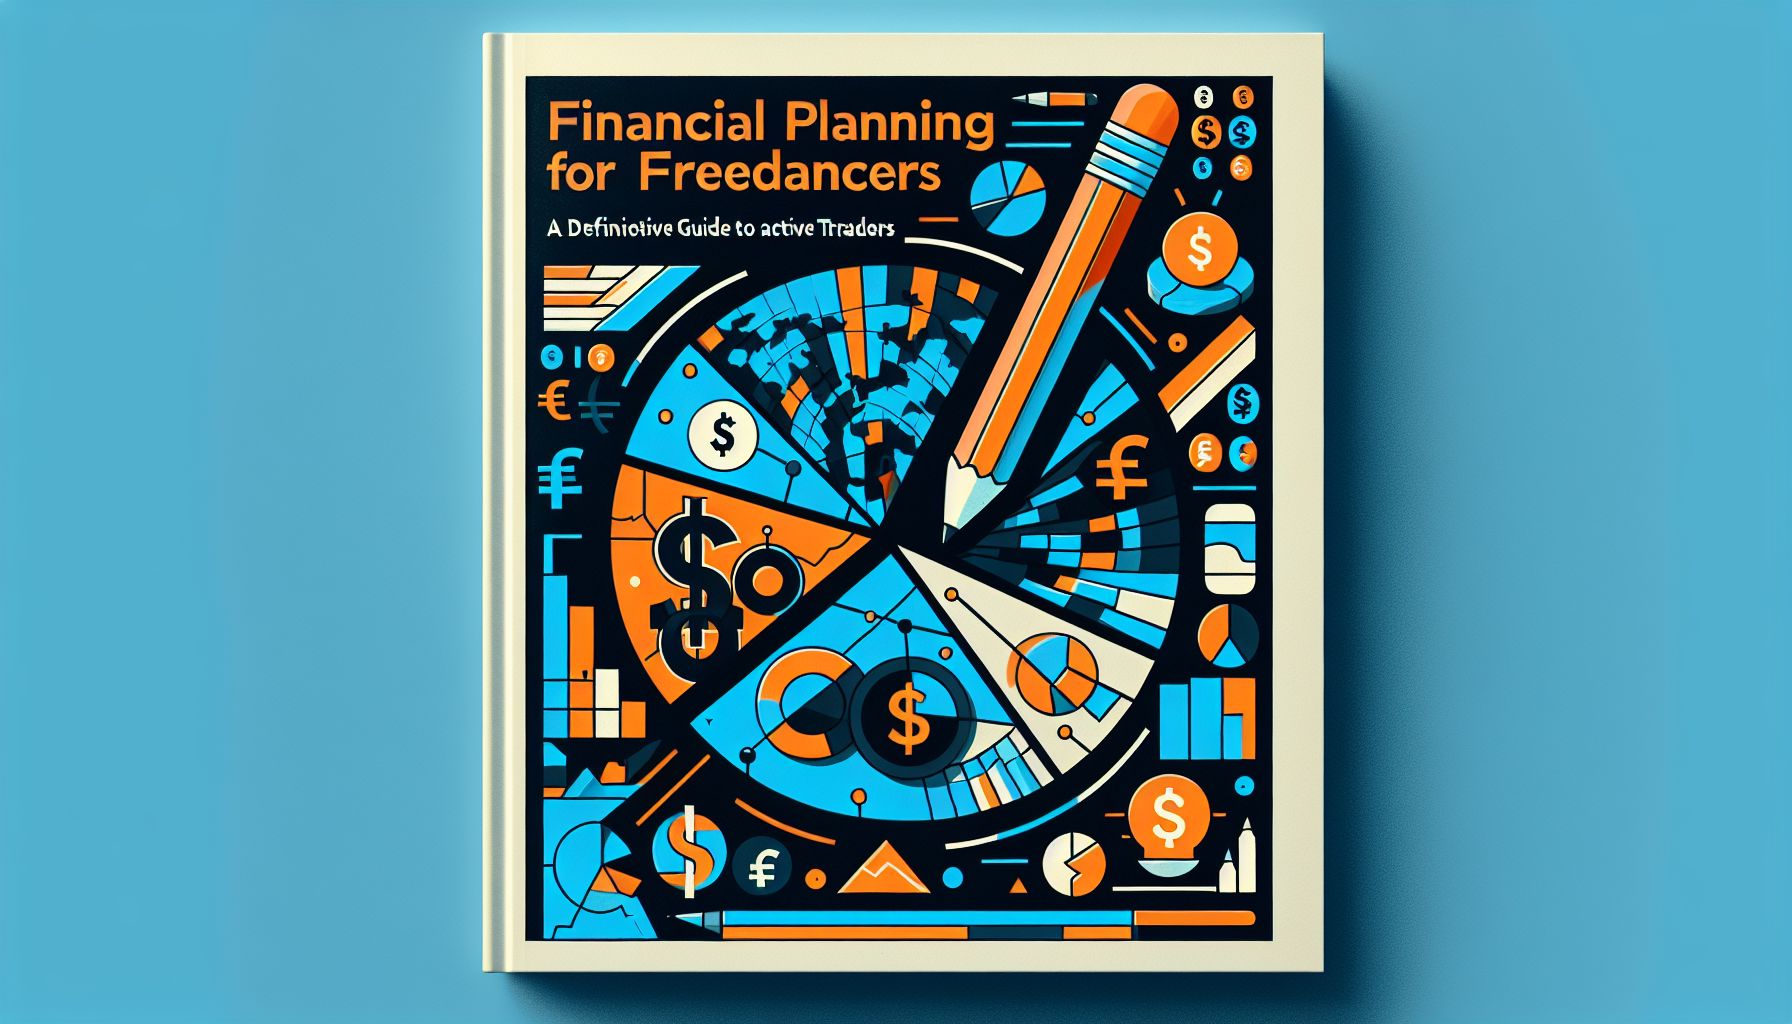 Financial Planning for Freelancers: A Definitive Guide for Active Traders